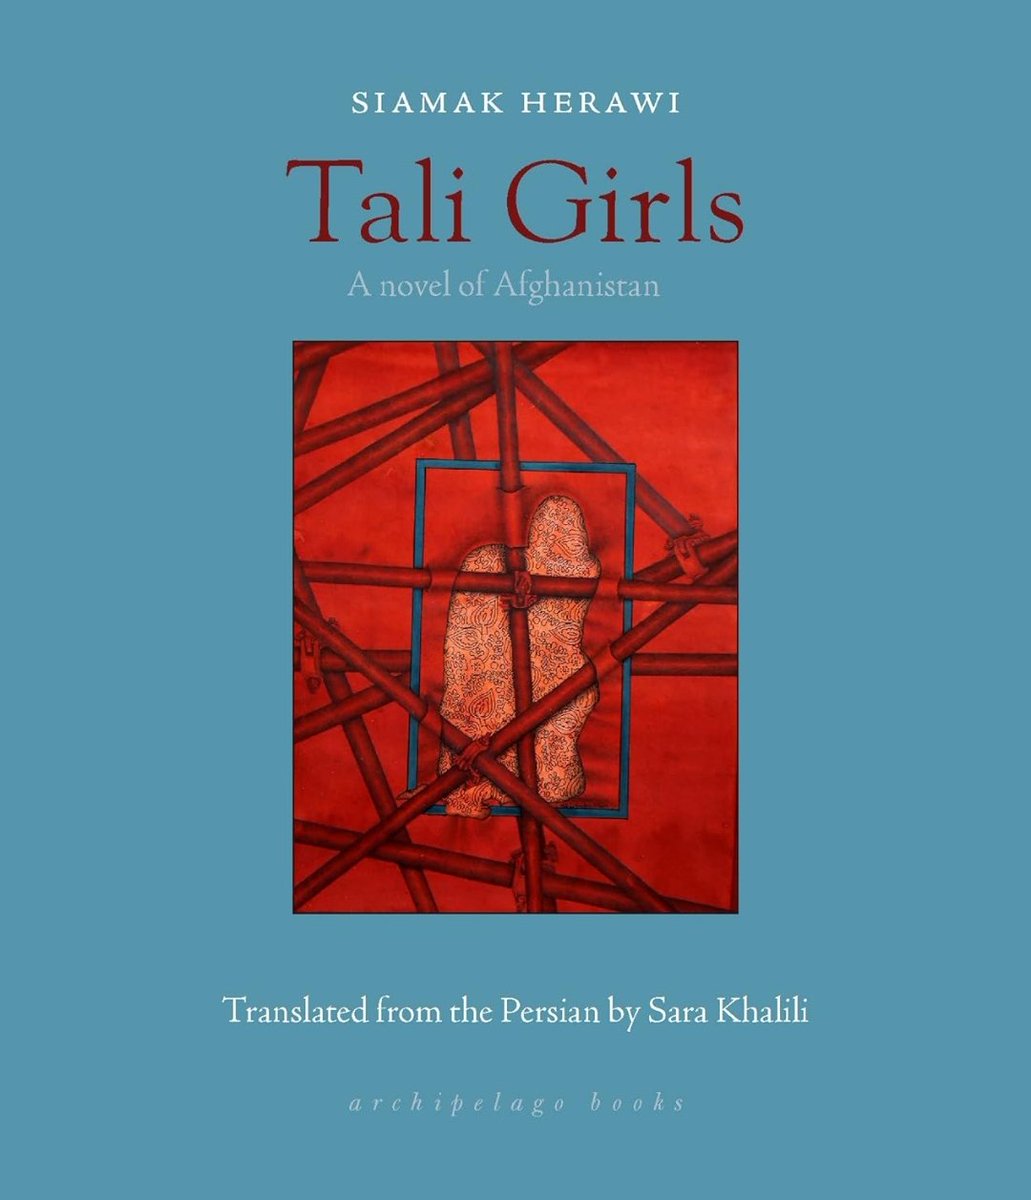 Tali girls by Siamak Herawi is a moving harrowing portrayal of the life of girls and women under the brutal Taliban Regime.Amidst all the brutalities , violence, misogyny there are some heart warming friendship and kin relationships.very powerful novel.#fictionintranslation